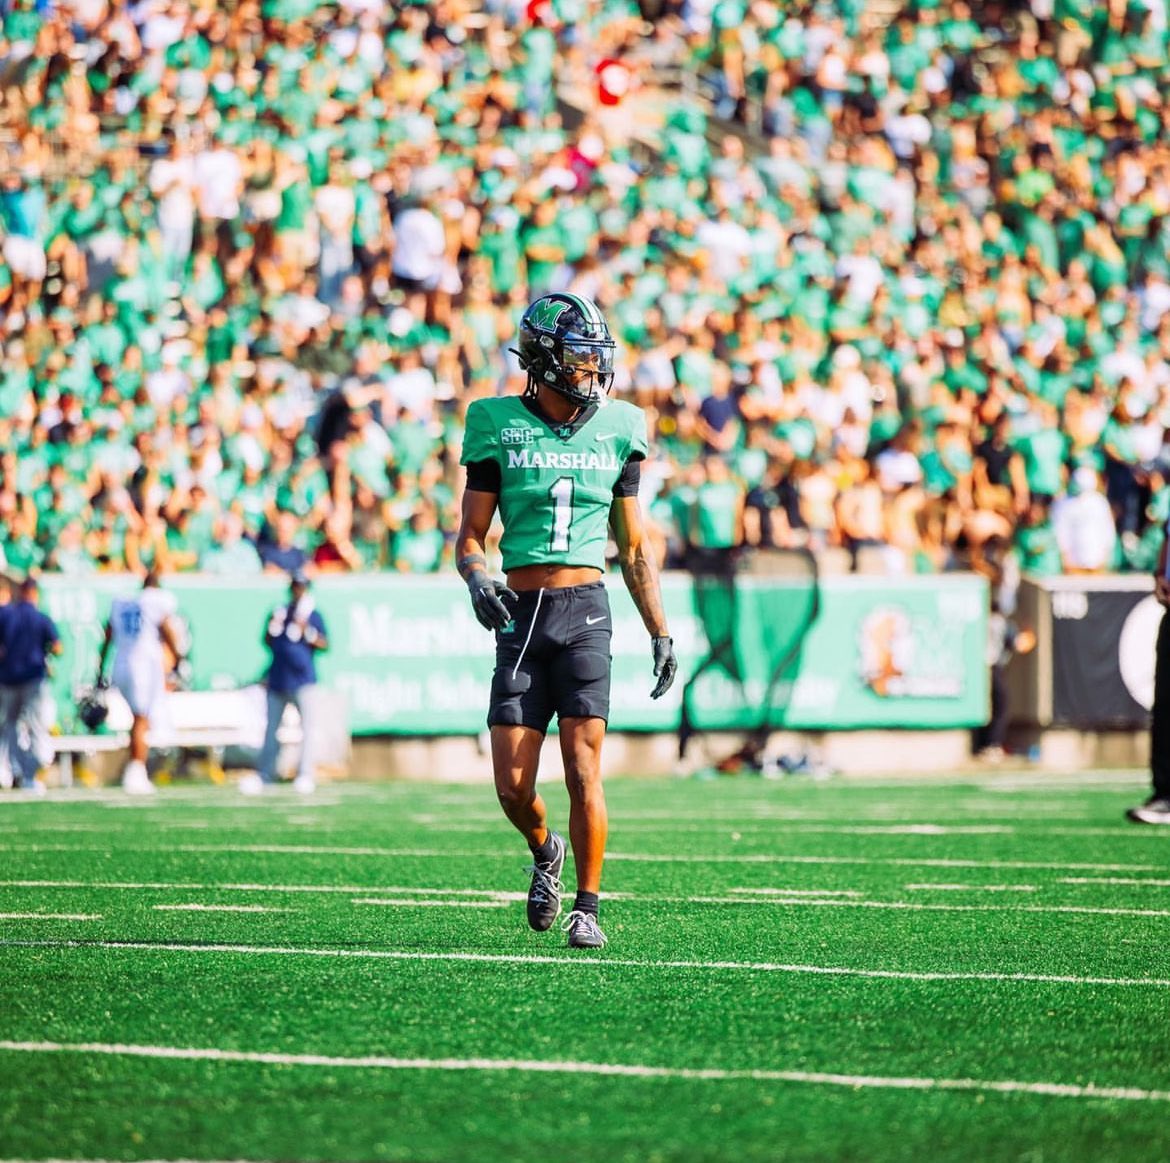 After a great conversation with @_CoachBaker2 I’m blessed to receive my 5th d1 offer from the University of Marshall #Goherd🟢⚫️ @HerdFB @AdamSchefter @adamgorney @ChadSimmons_ @BrandonHuffman @GregBiggins @CoachTroop3 @coach_o_sports